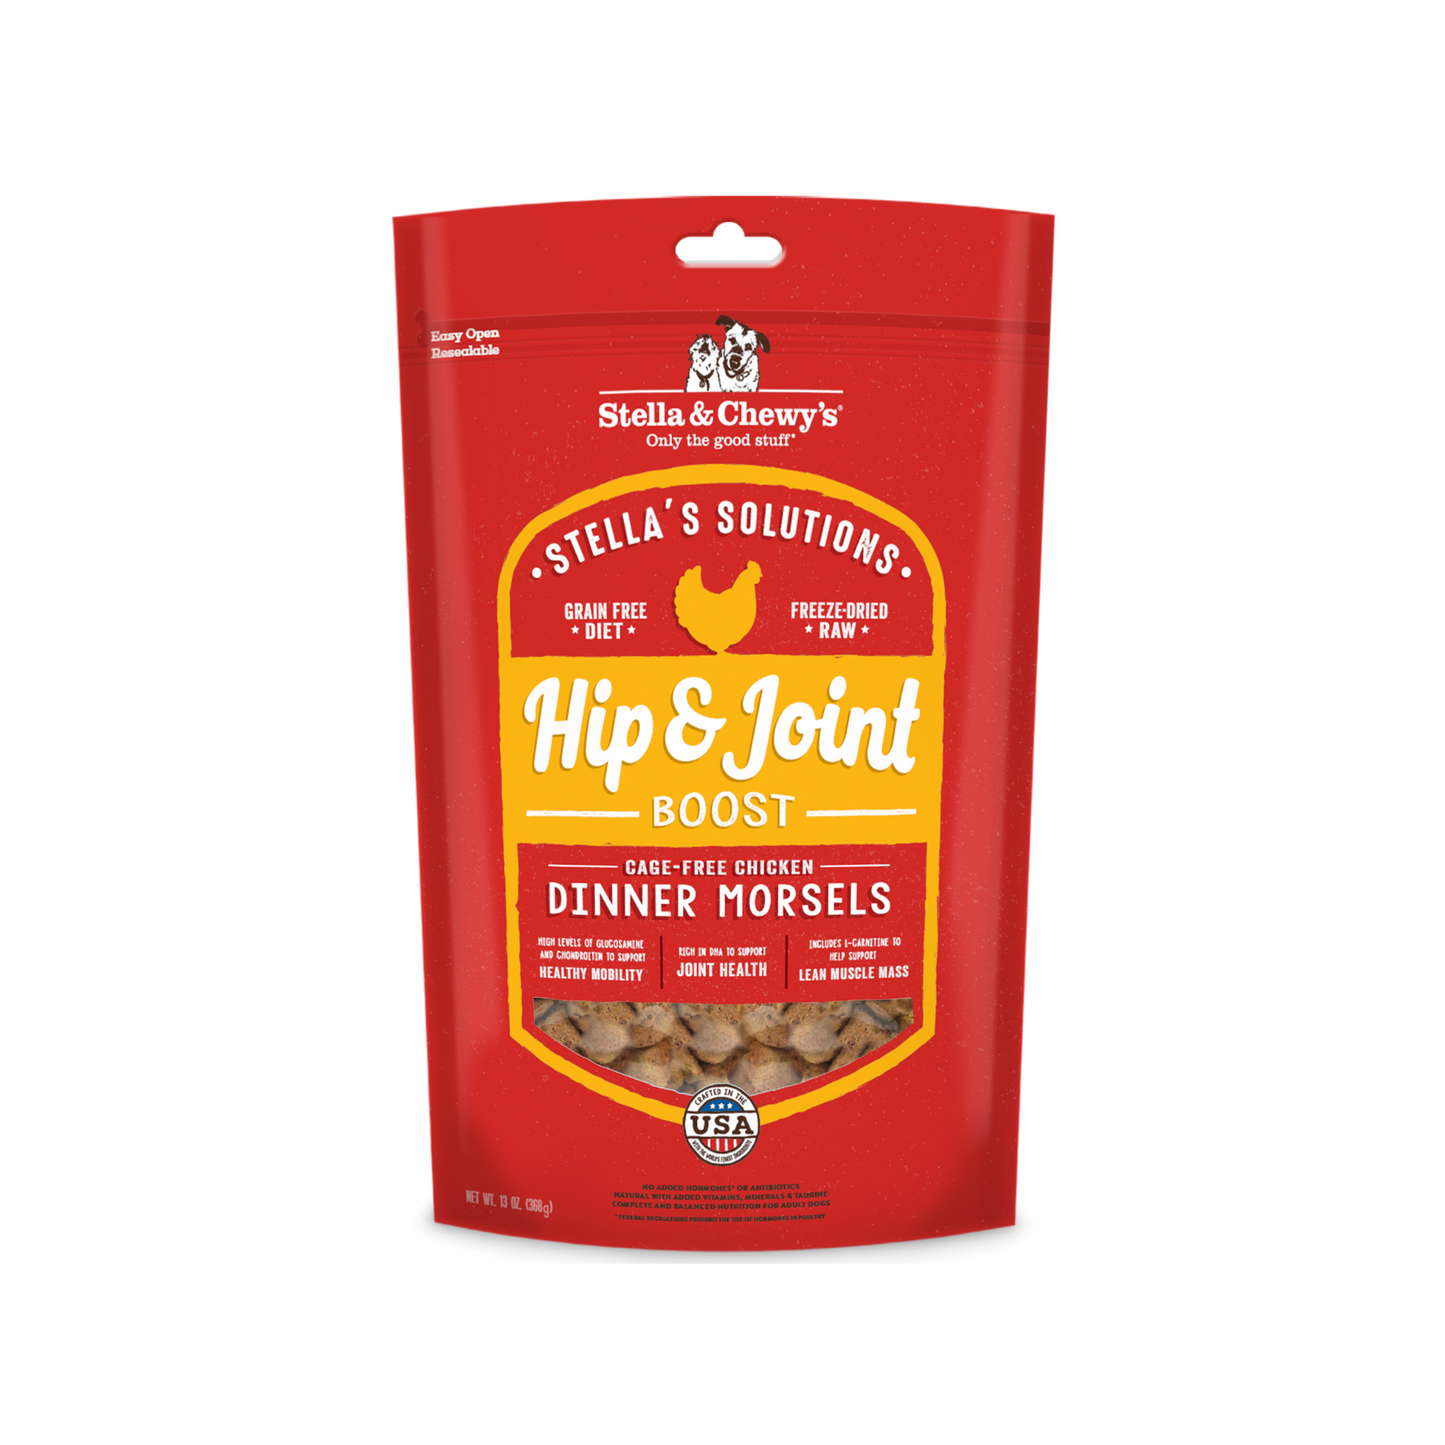 Stella and Chewy's Stella Solutions Hip & Joint Boost Chicken Dinner Morsels Freeze Dried Dog Food 13oz